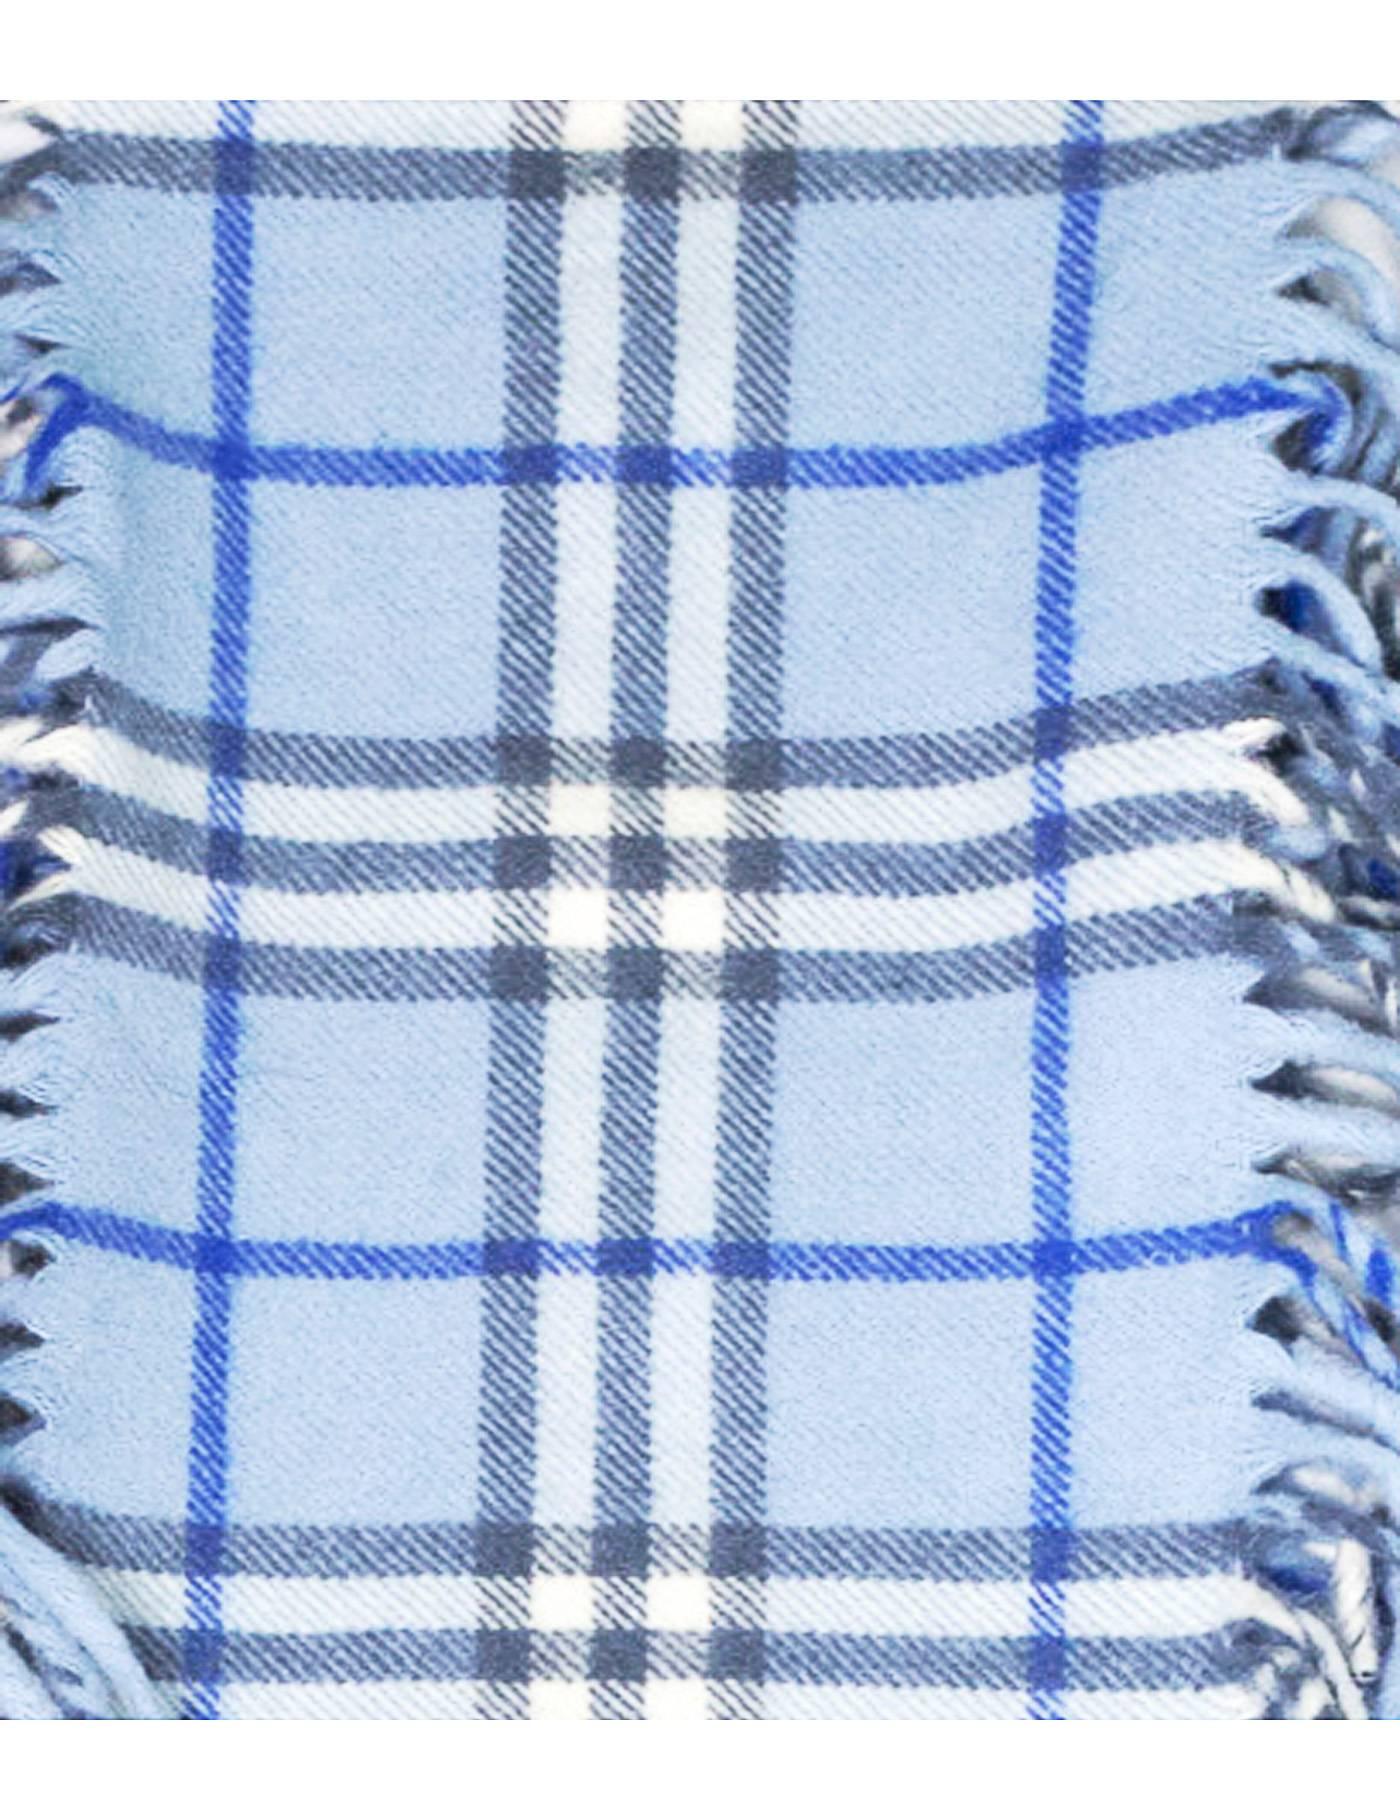 Burberry Blue Cashmere Nova Check Happy Scarf
Features fringe trim

Made In: England
Color: Blue
Composition: 100% Cashmere
Overall Condition: Excellent pre-owned condition with the exception of light wear at fringe
Measurements: 
Length: